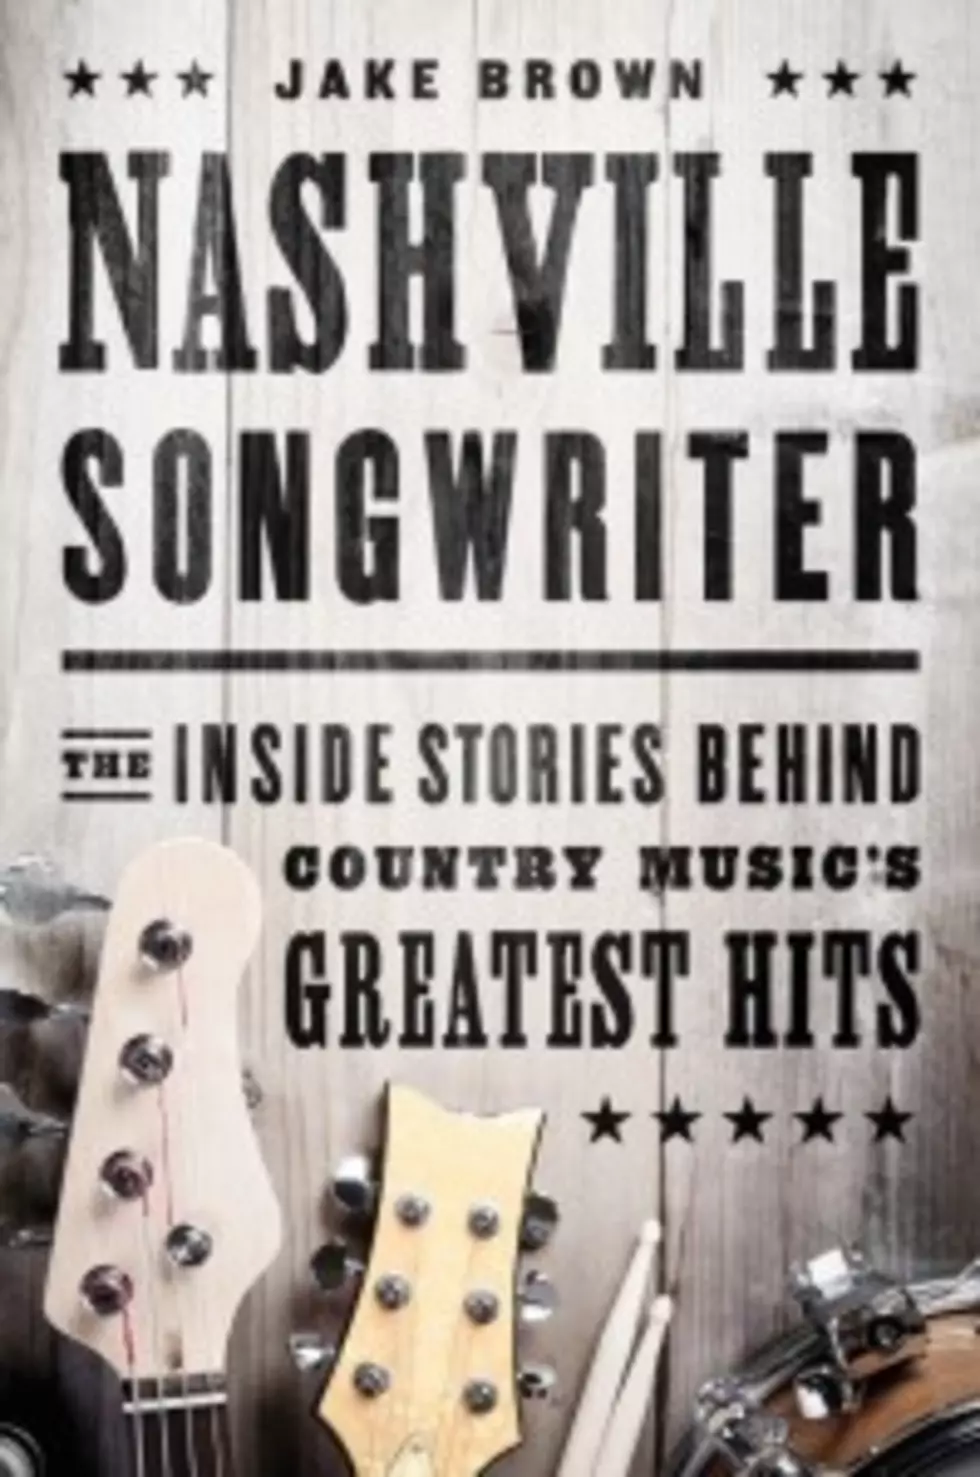 &#8216;Nashville Songwriter&#8217; Book to Be Released This Month